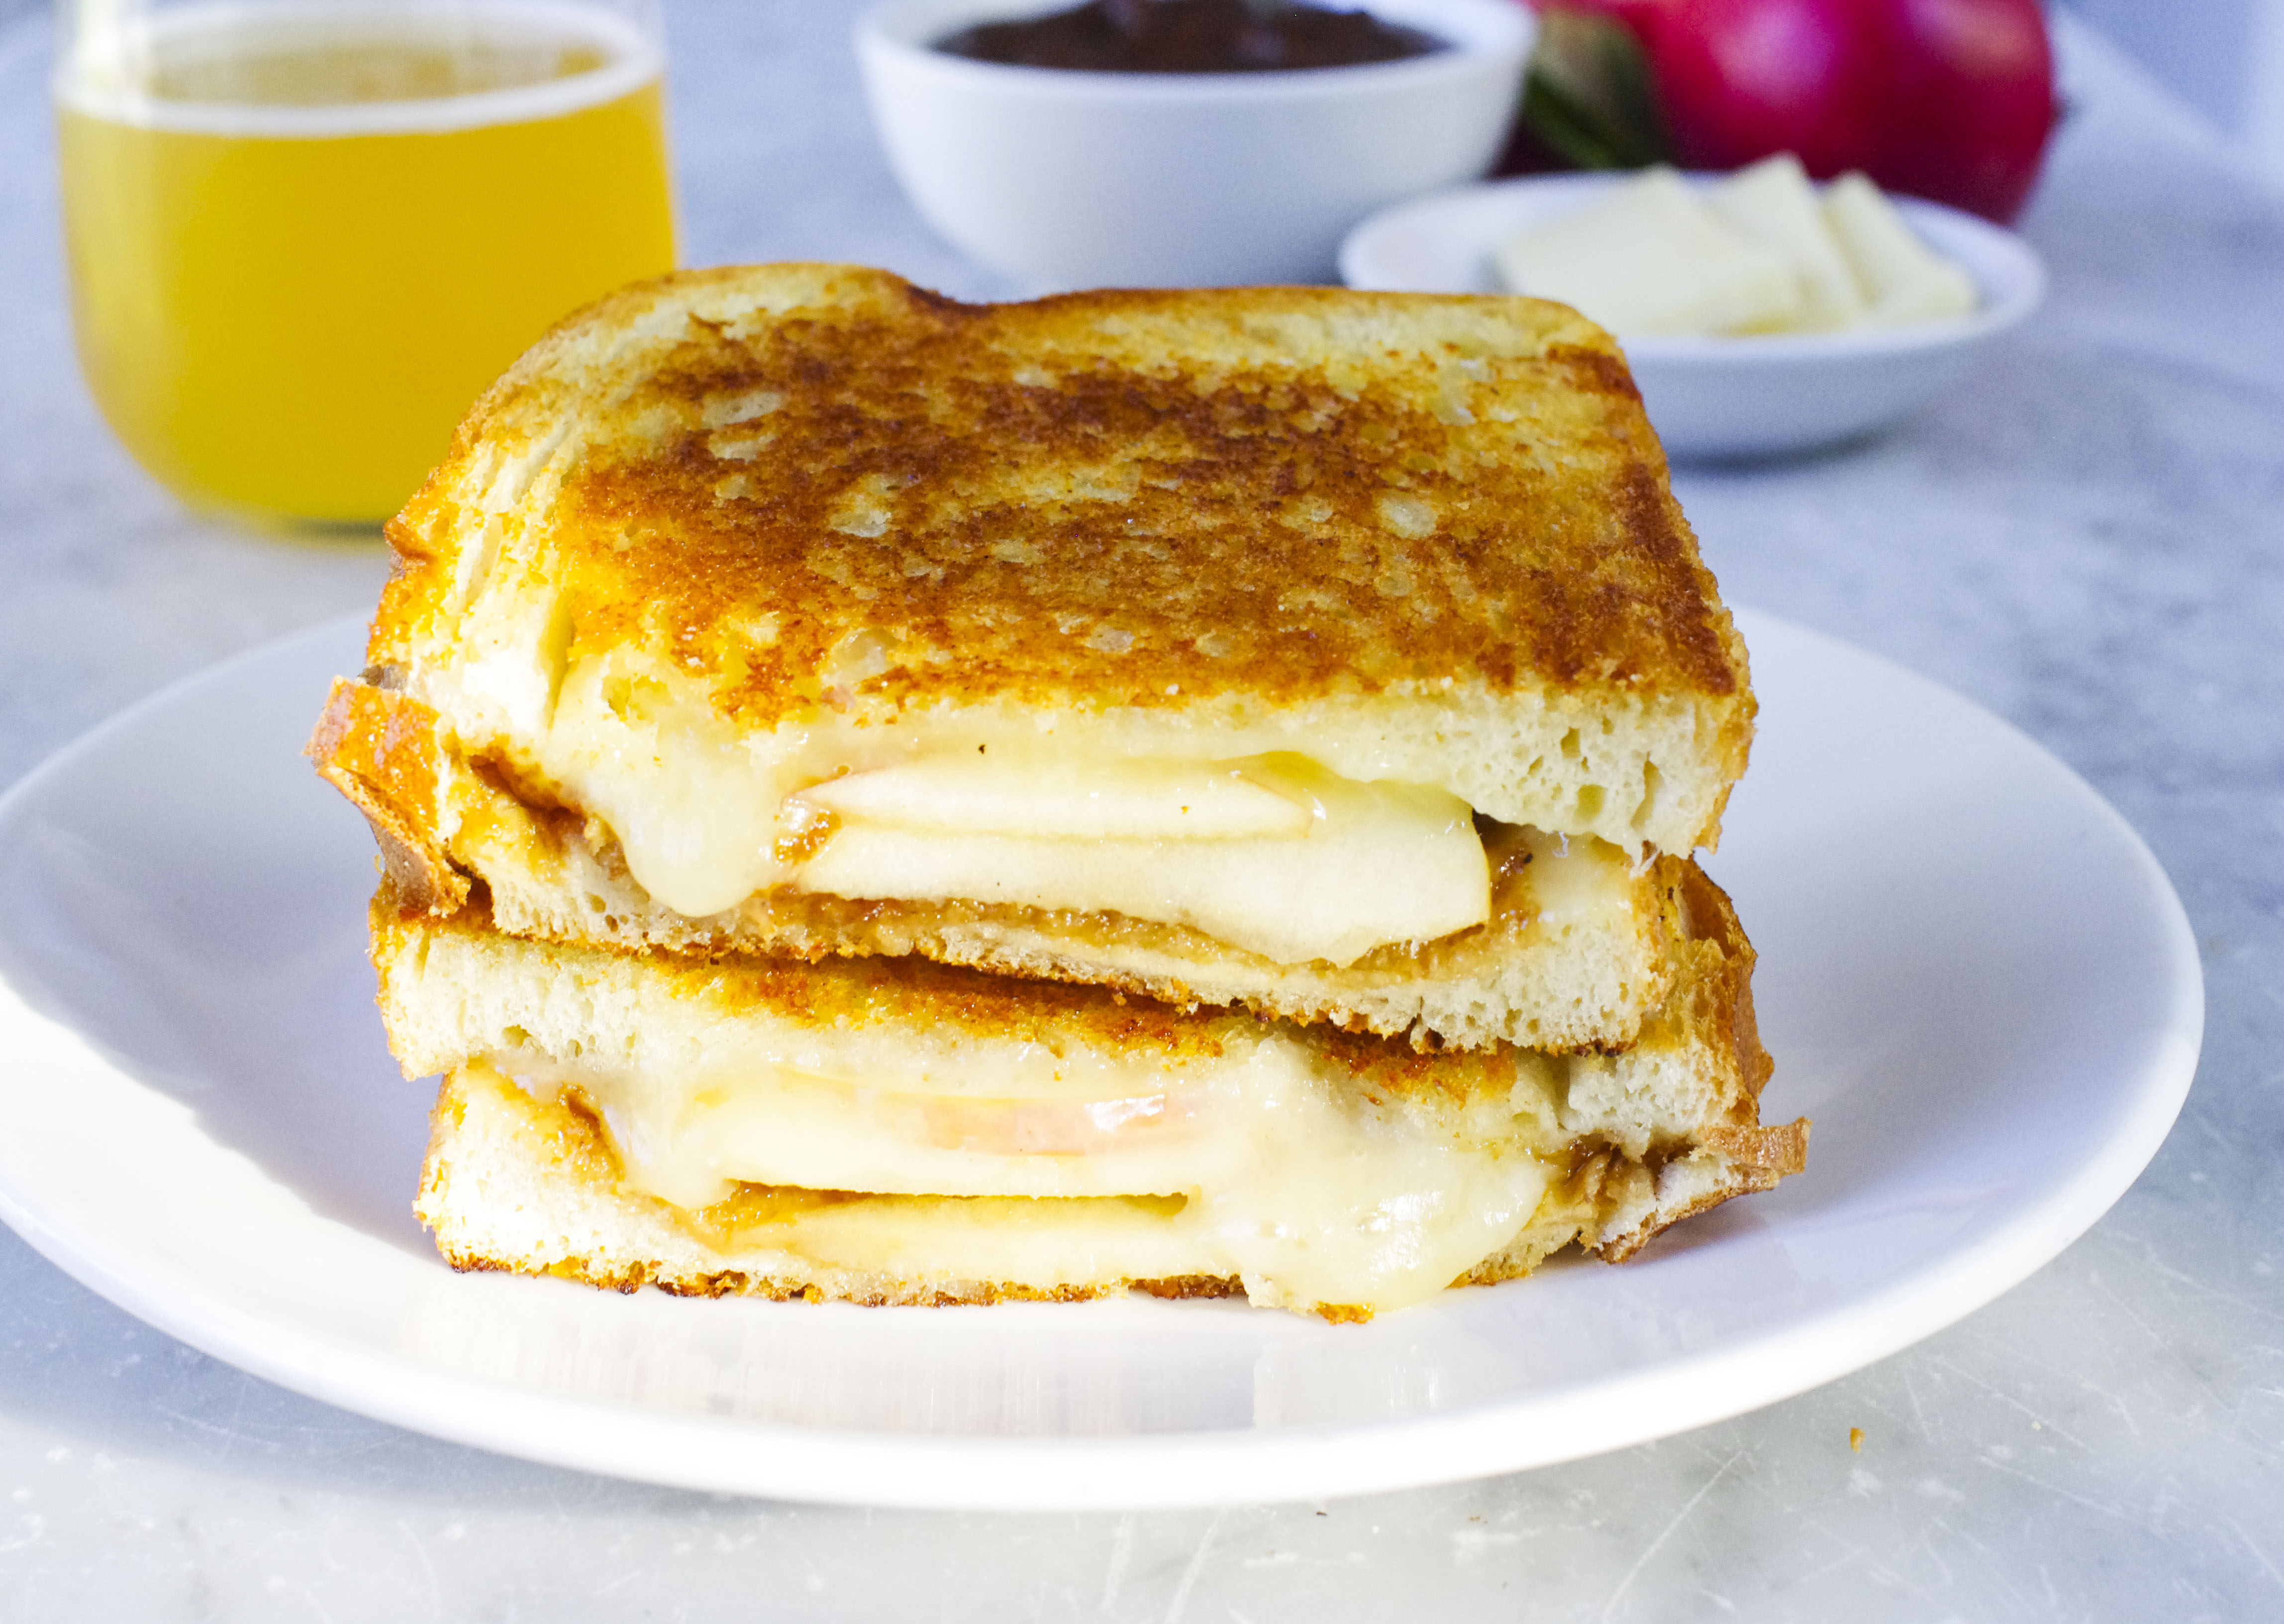 How to make a Grilled Cheese with your Revolution Toaster & Panini Pre